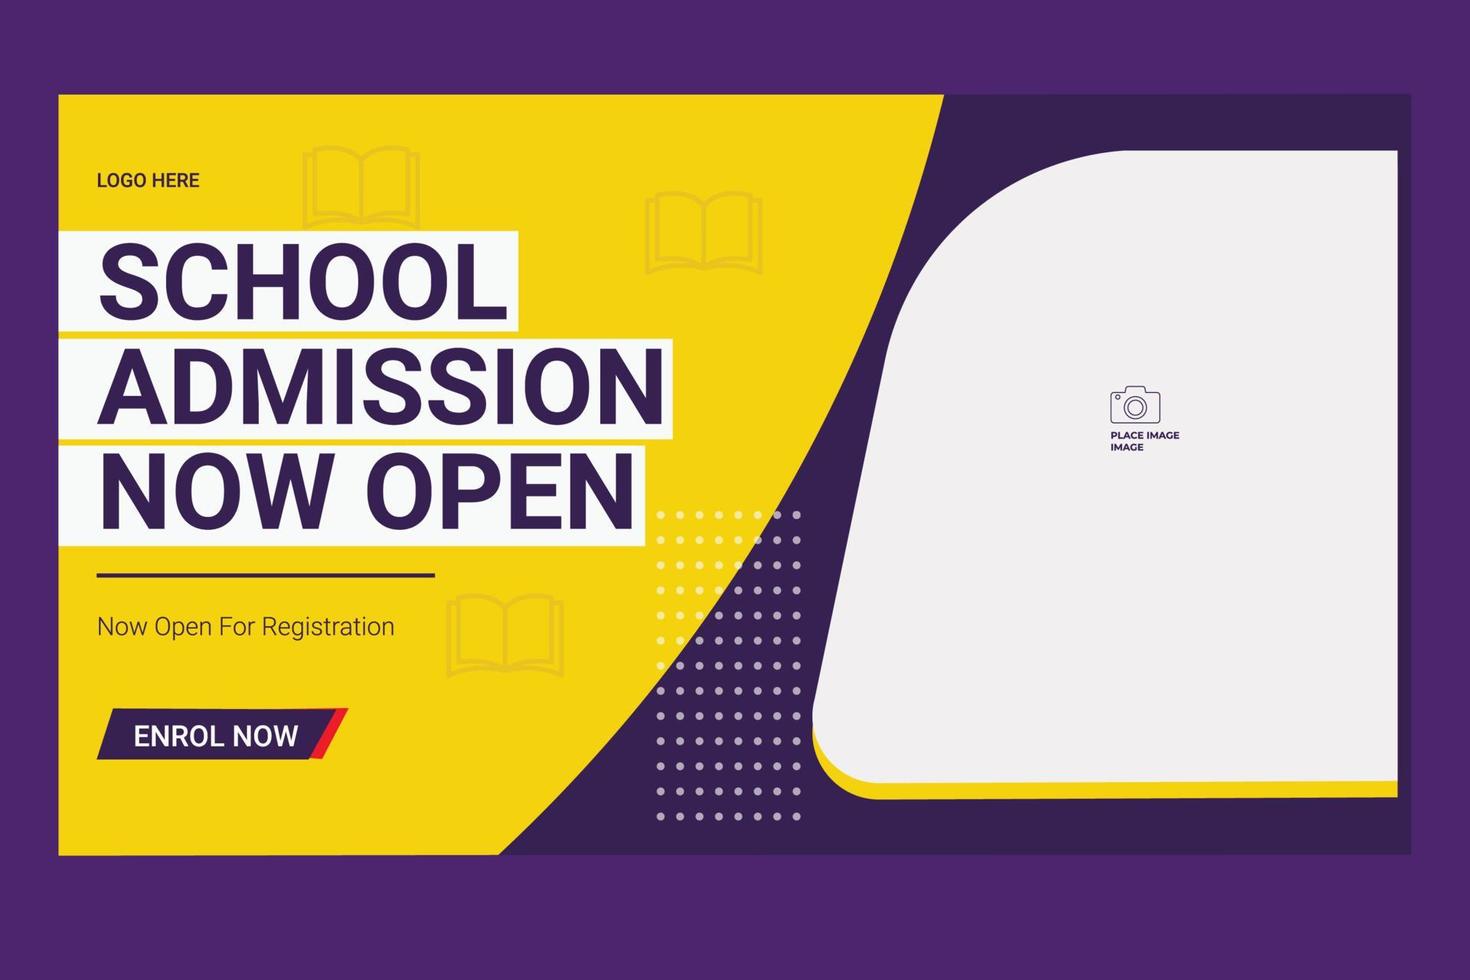 Editable Kids School Education Admission Thumbnail and Web banner vector